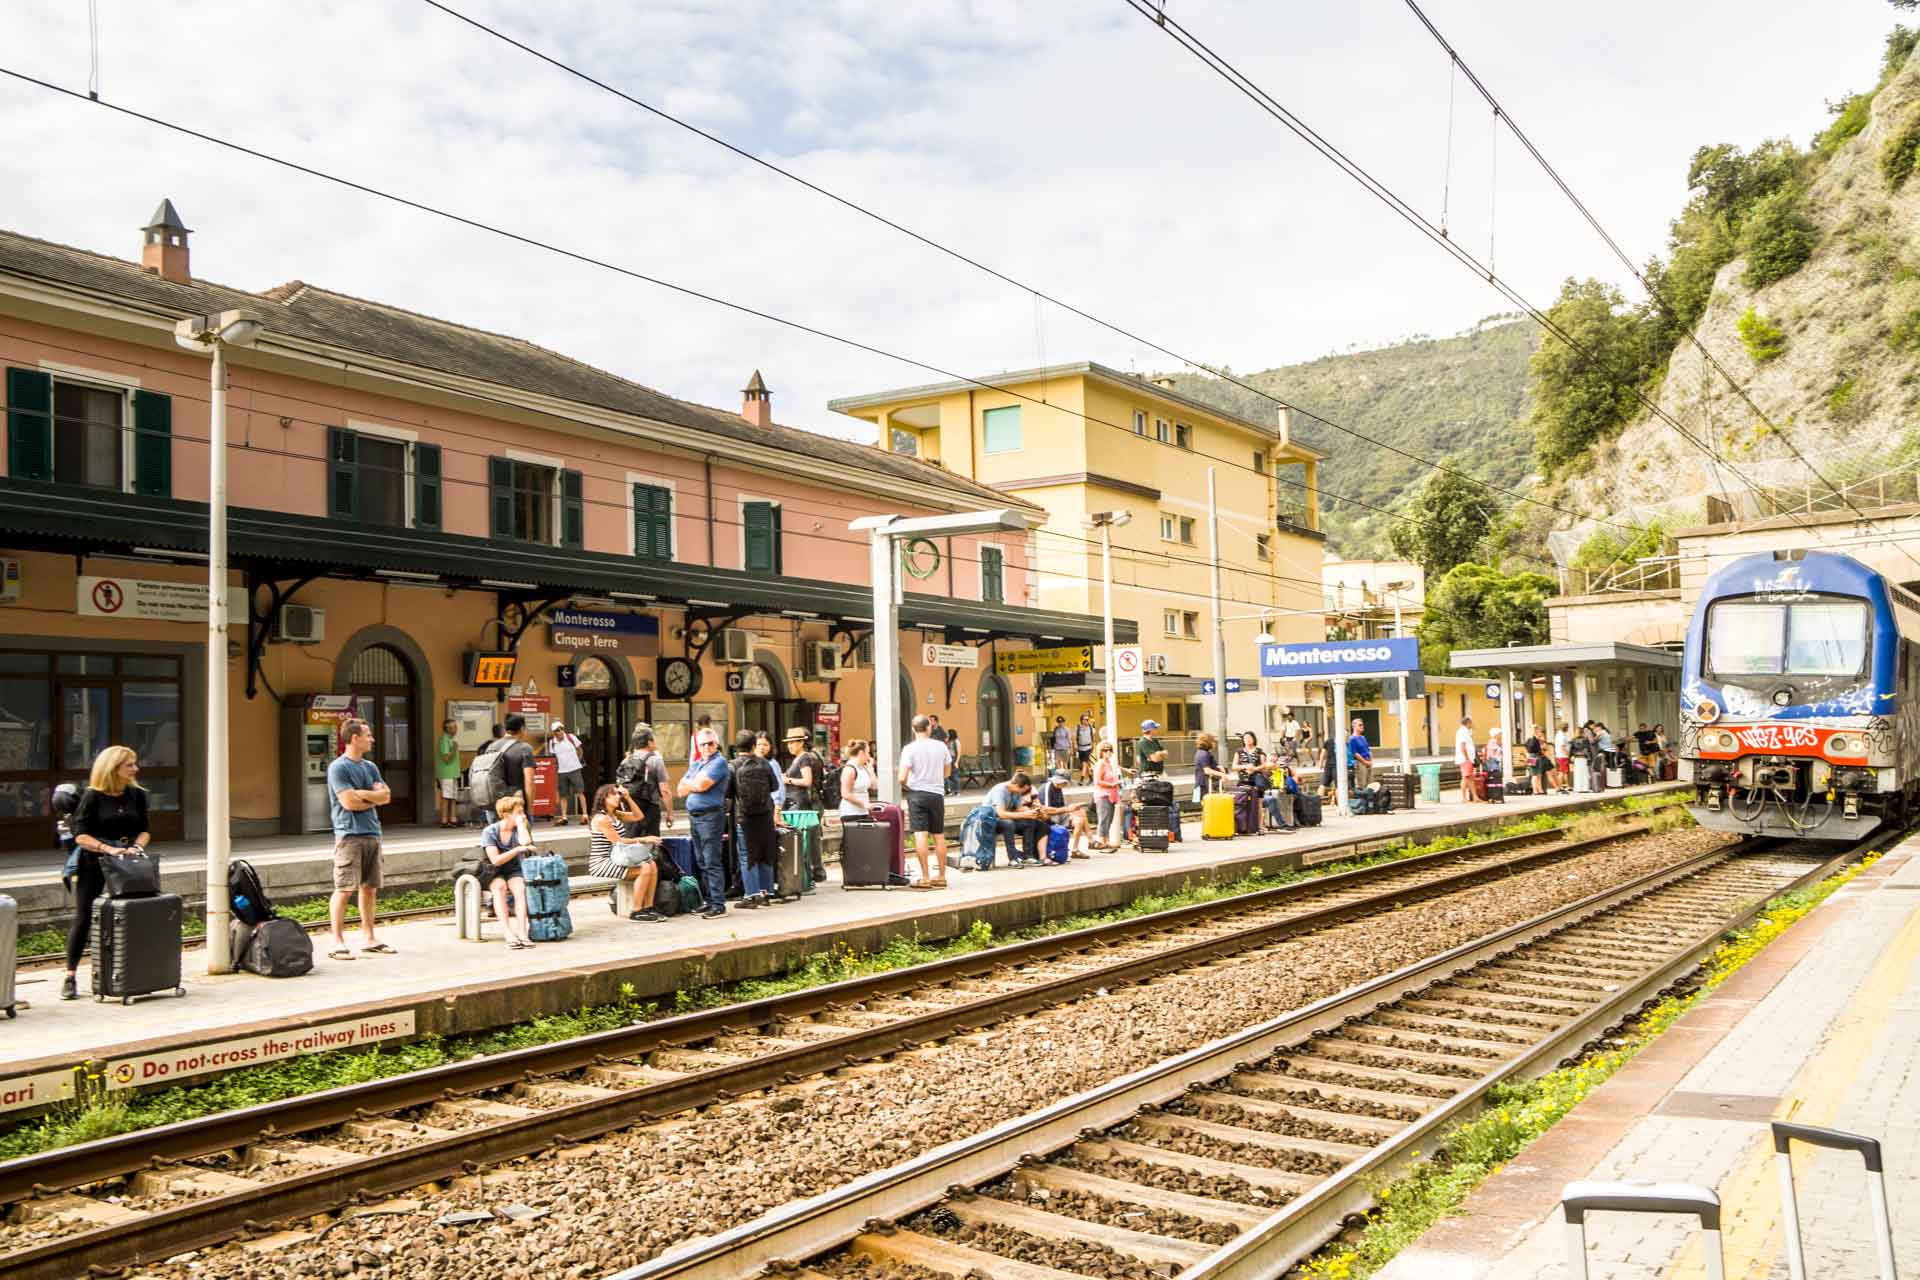 The Easiest Way to Explore the French & Italian Riviera by Train